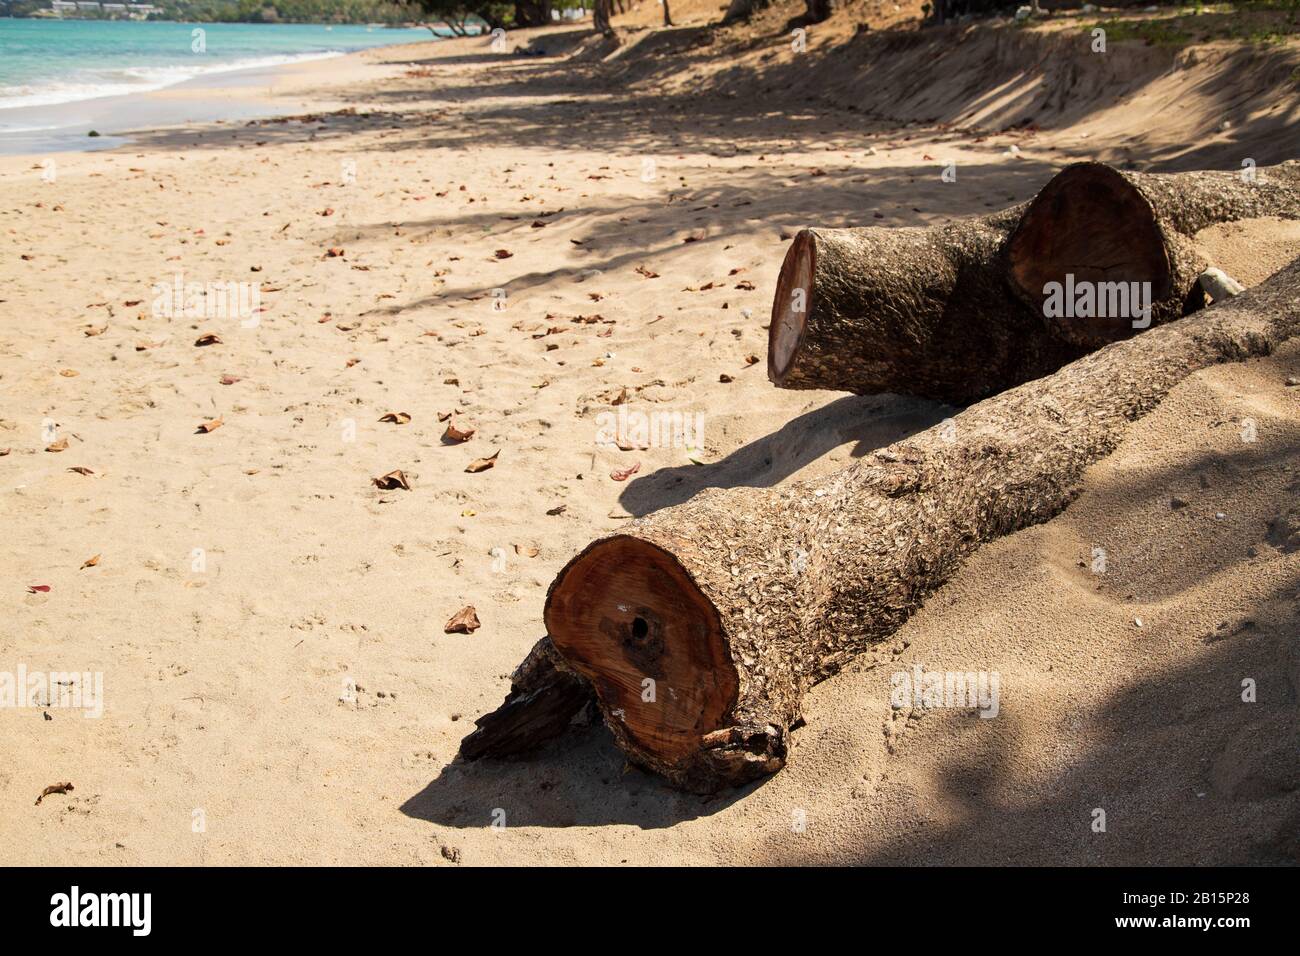 Sawn tree trunks of cedar trees on the beach weathered by the hot Caribbean sun Stock Photo